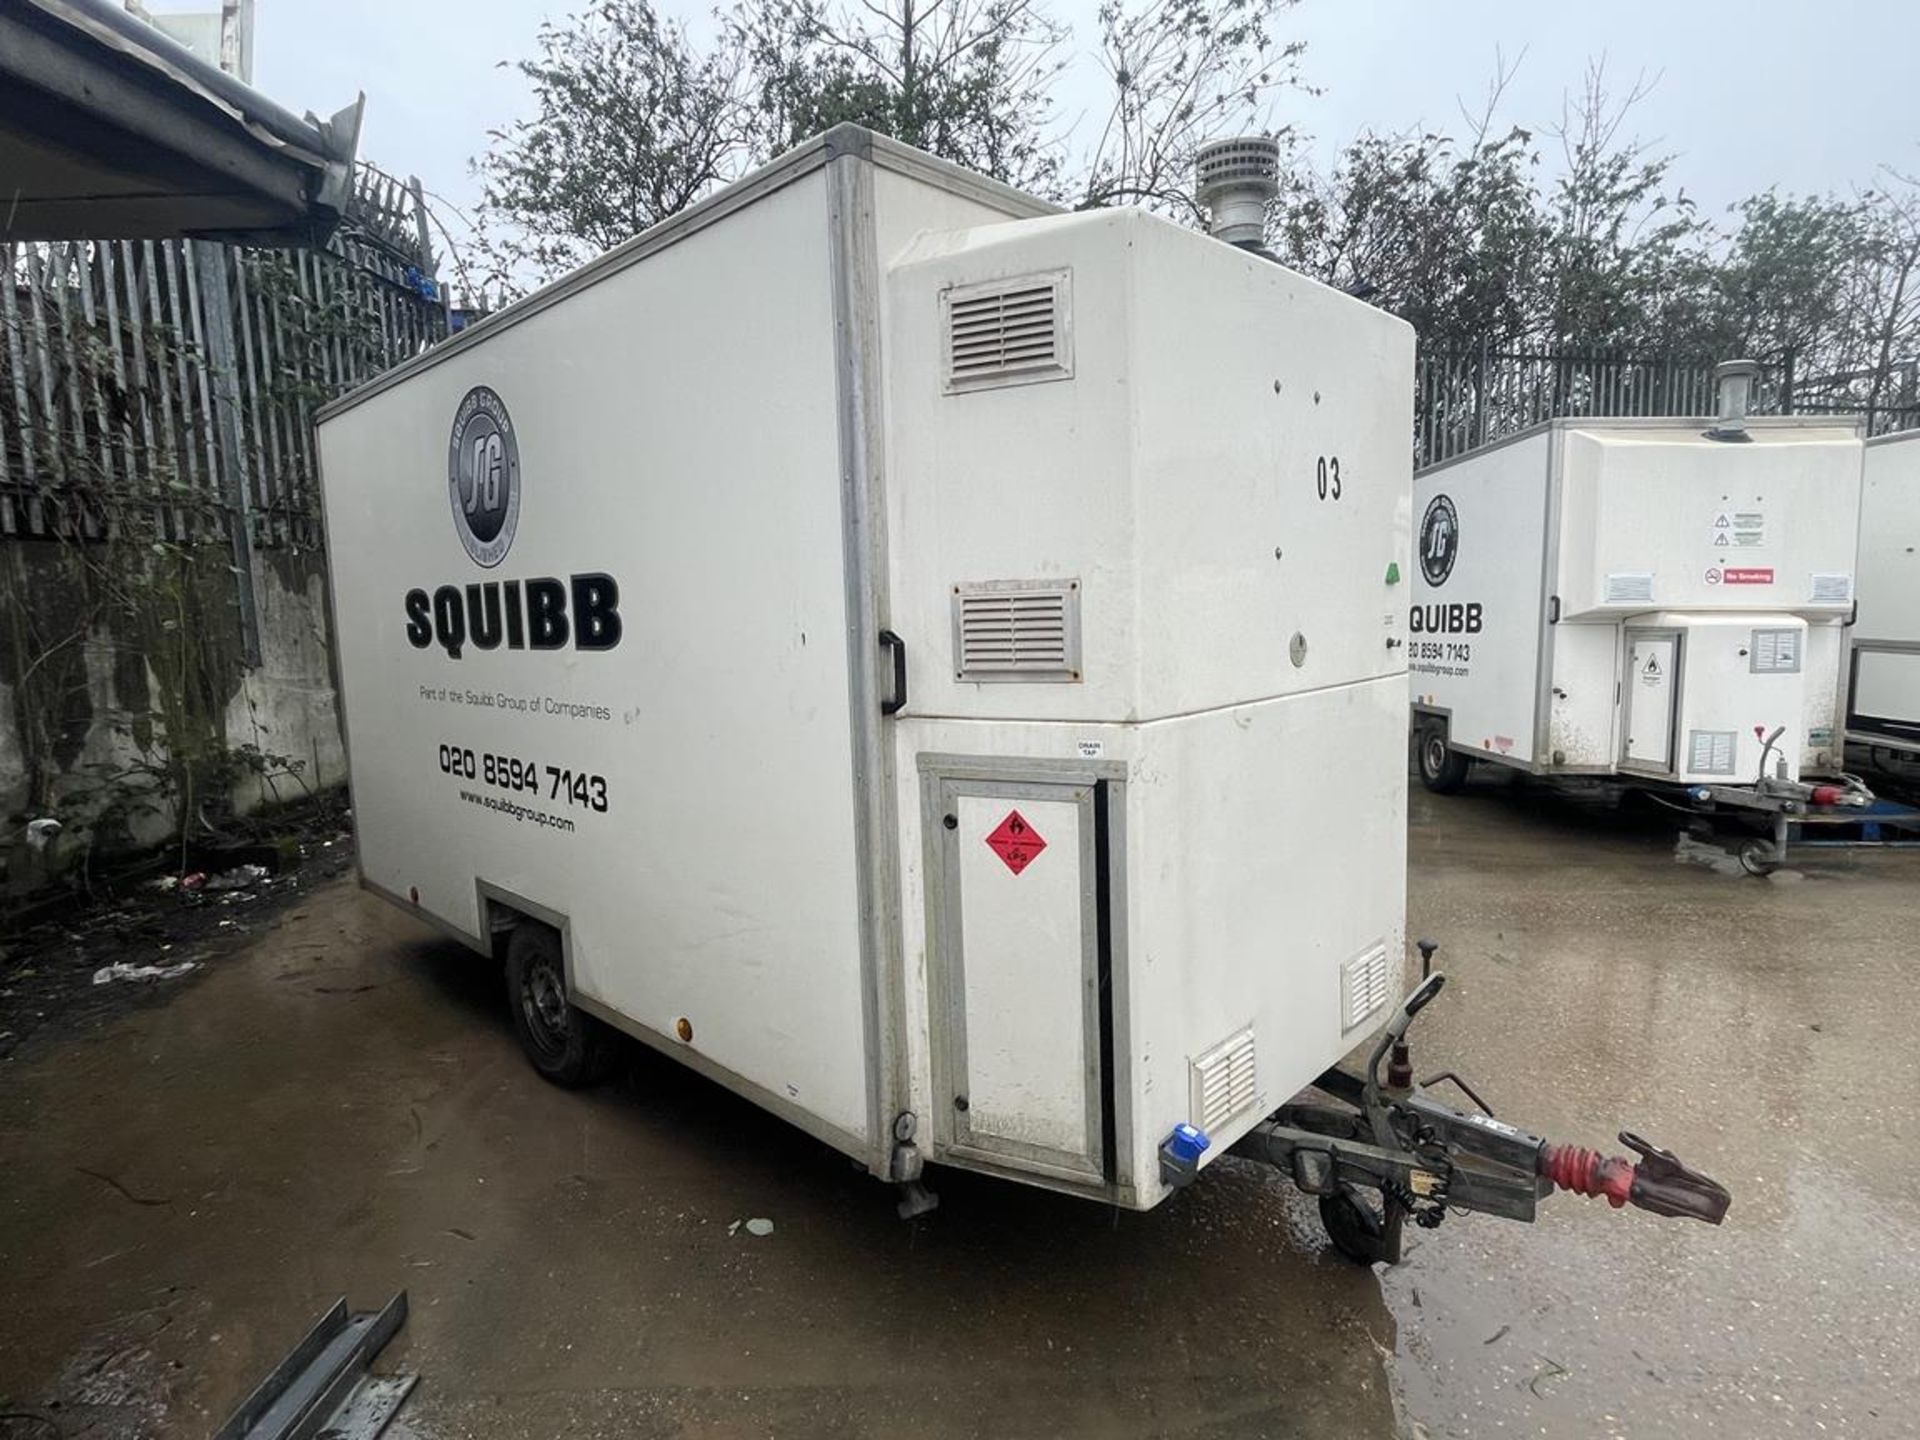 Thermac Model 360175 Towable Trailer Welfare Unit S/No. 2539 (YOM: 2011)